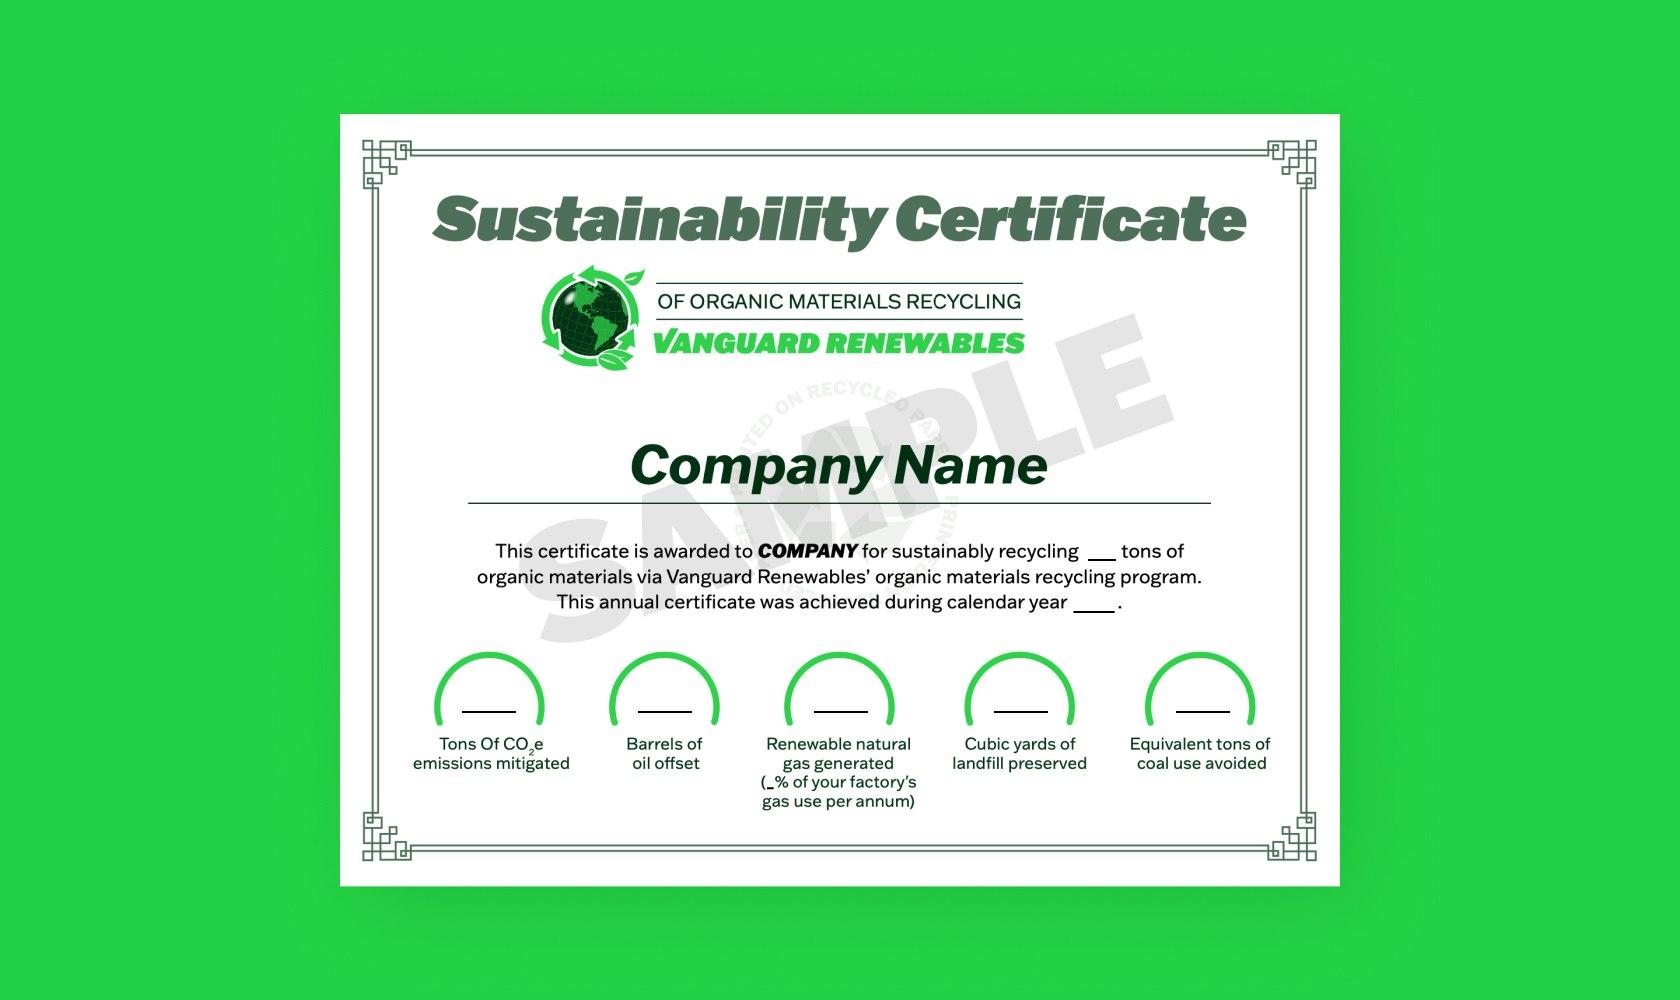 Sample sustainability certificate for commercial waste recycling, a food and beverage waste solution